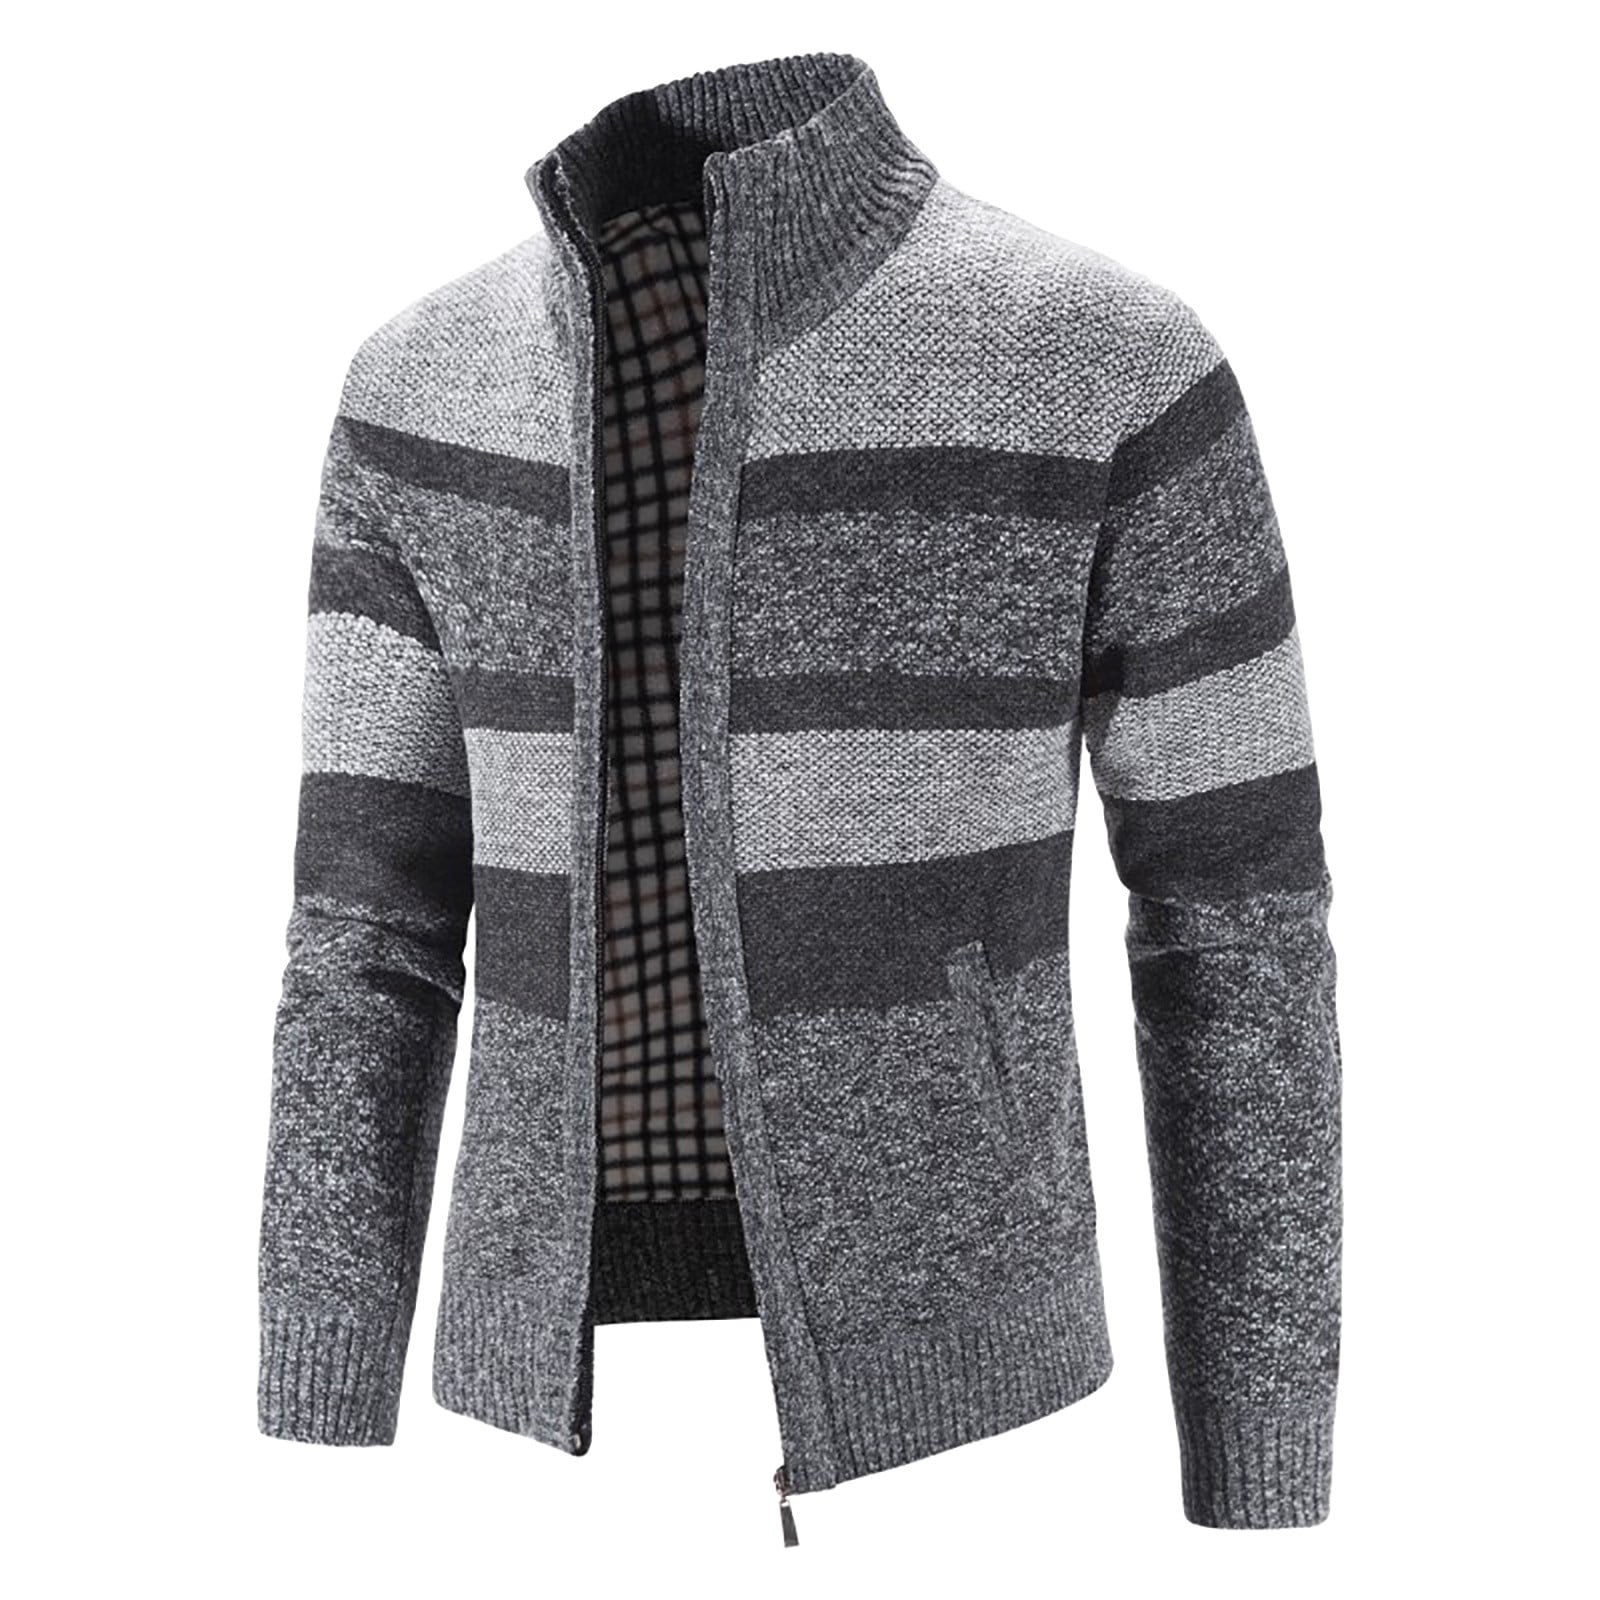 LoyisViDion Mens Zip Up Knitted Cardigan Thick Sweater Stand Collar ...